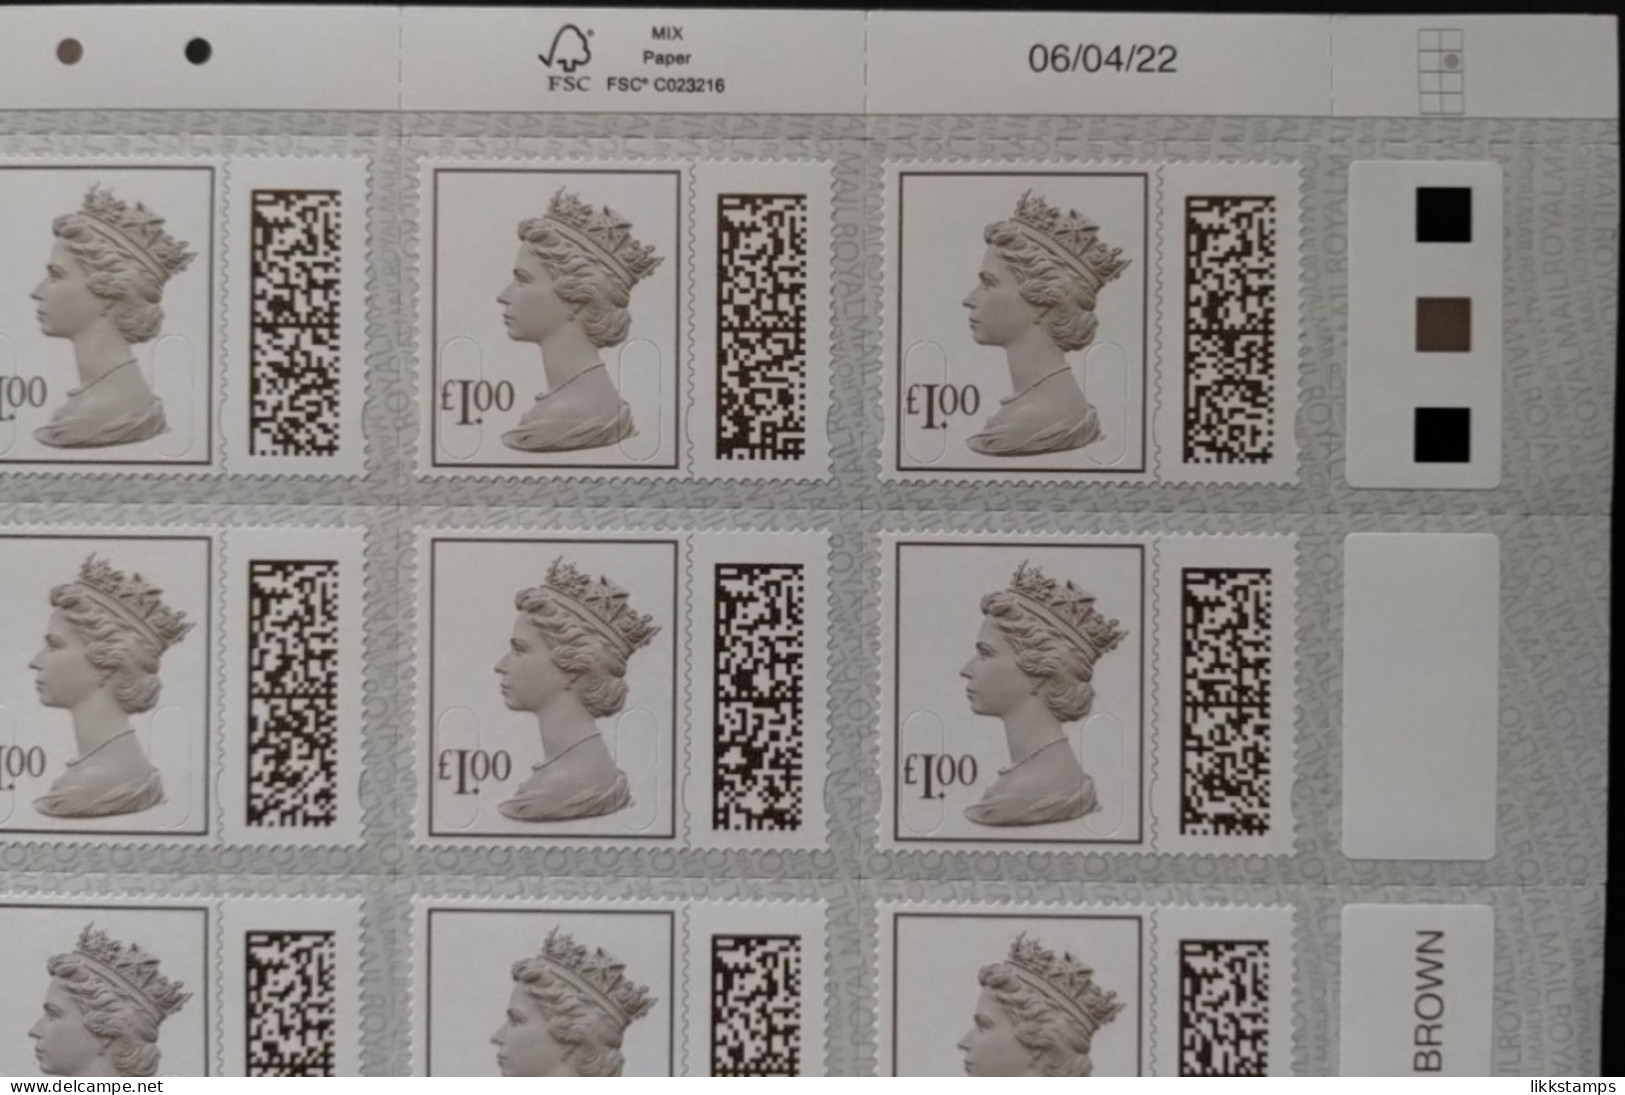 S.G. V4780 ~ 06/04/2022 ~ FULL COUNTER SHEET OF 25 X £1.00p UNFOLDED AND NHM #02932 - Série 'Machin'